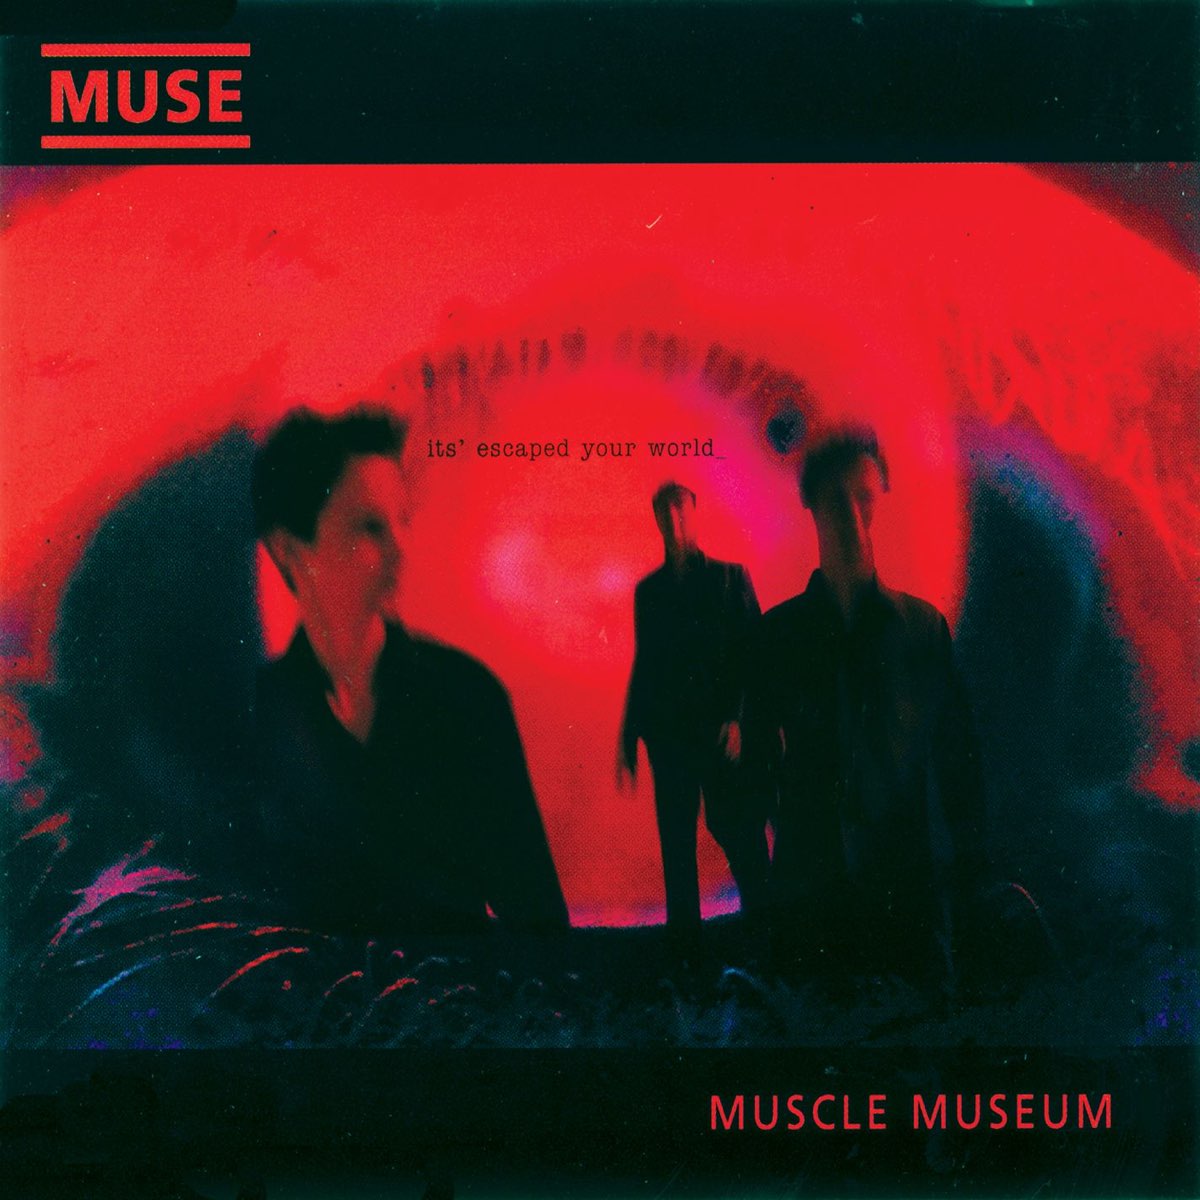 Muse Do We Need This? cover artwork